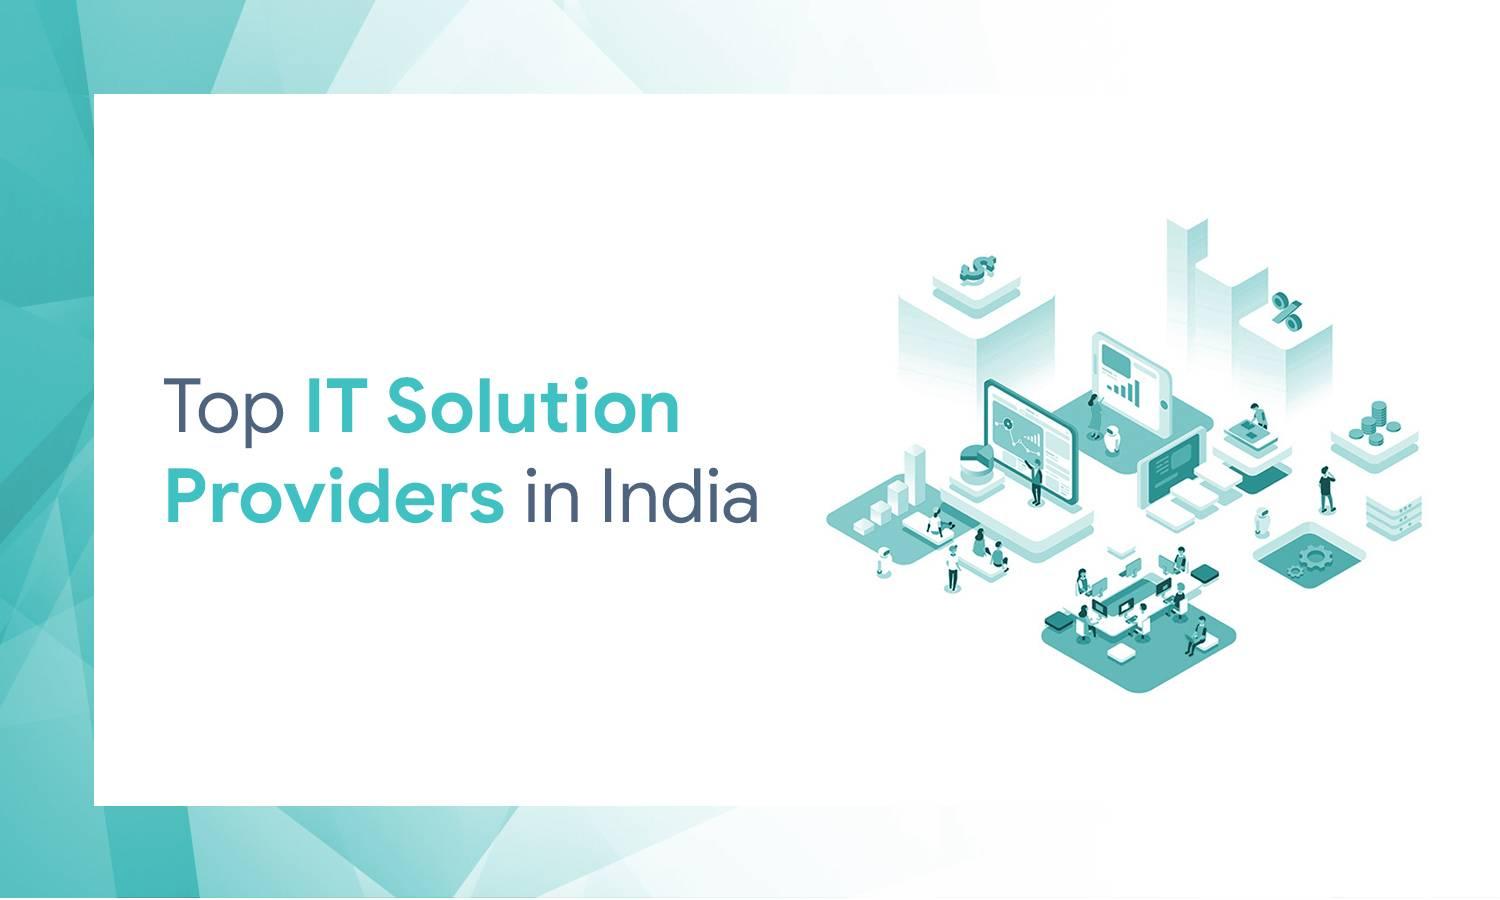 Prominent IT Solution Providers in India